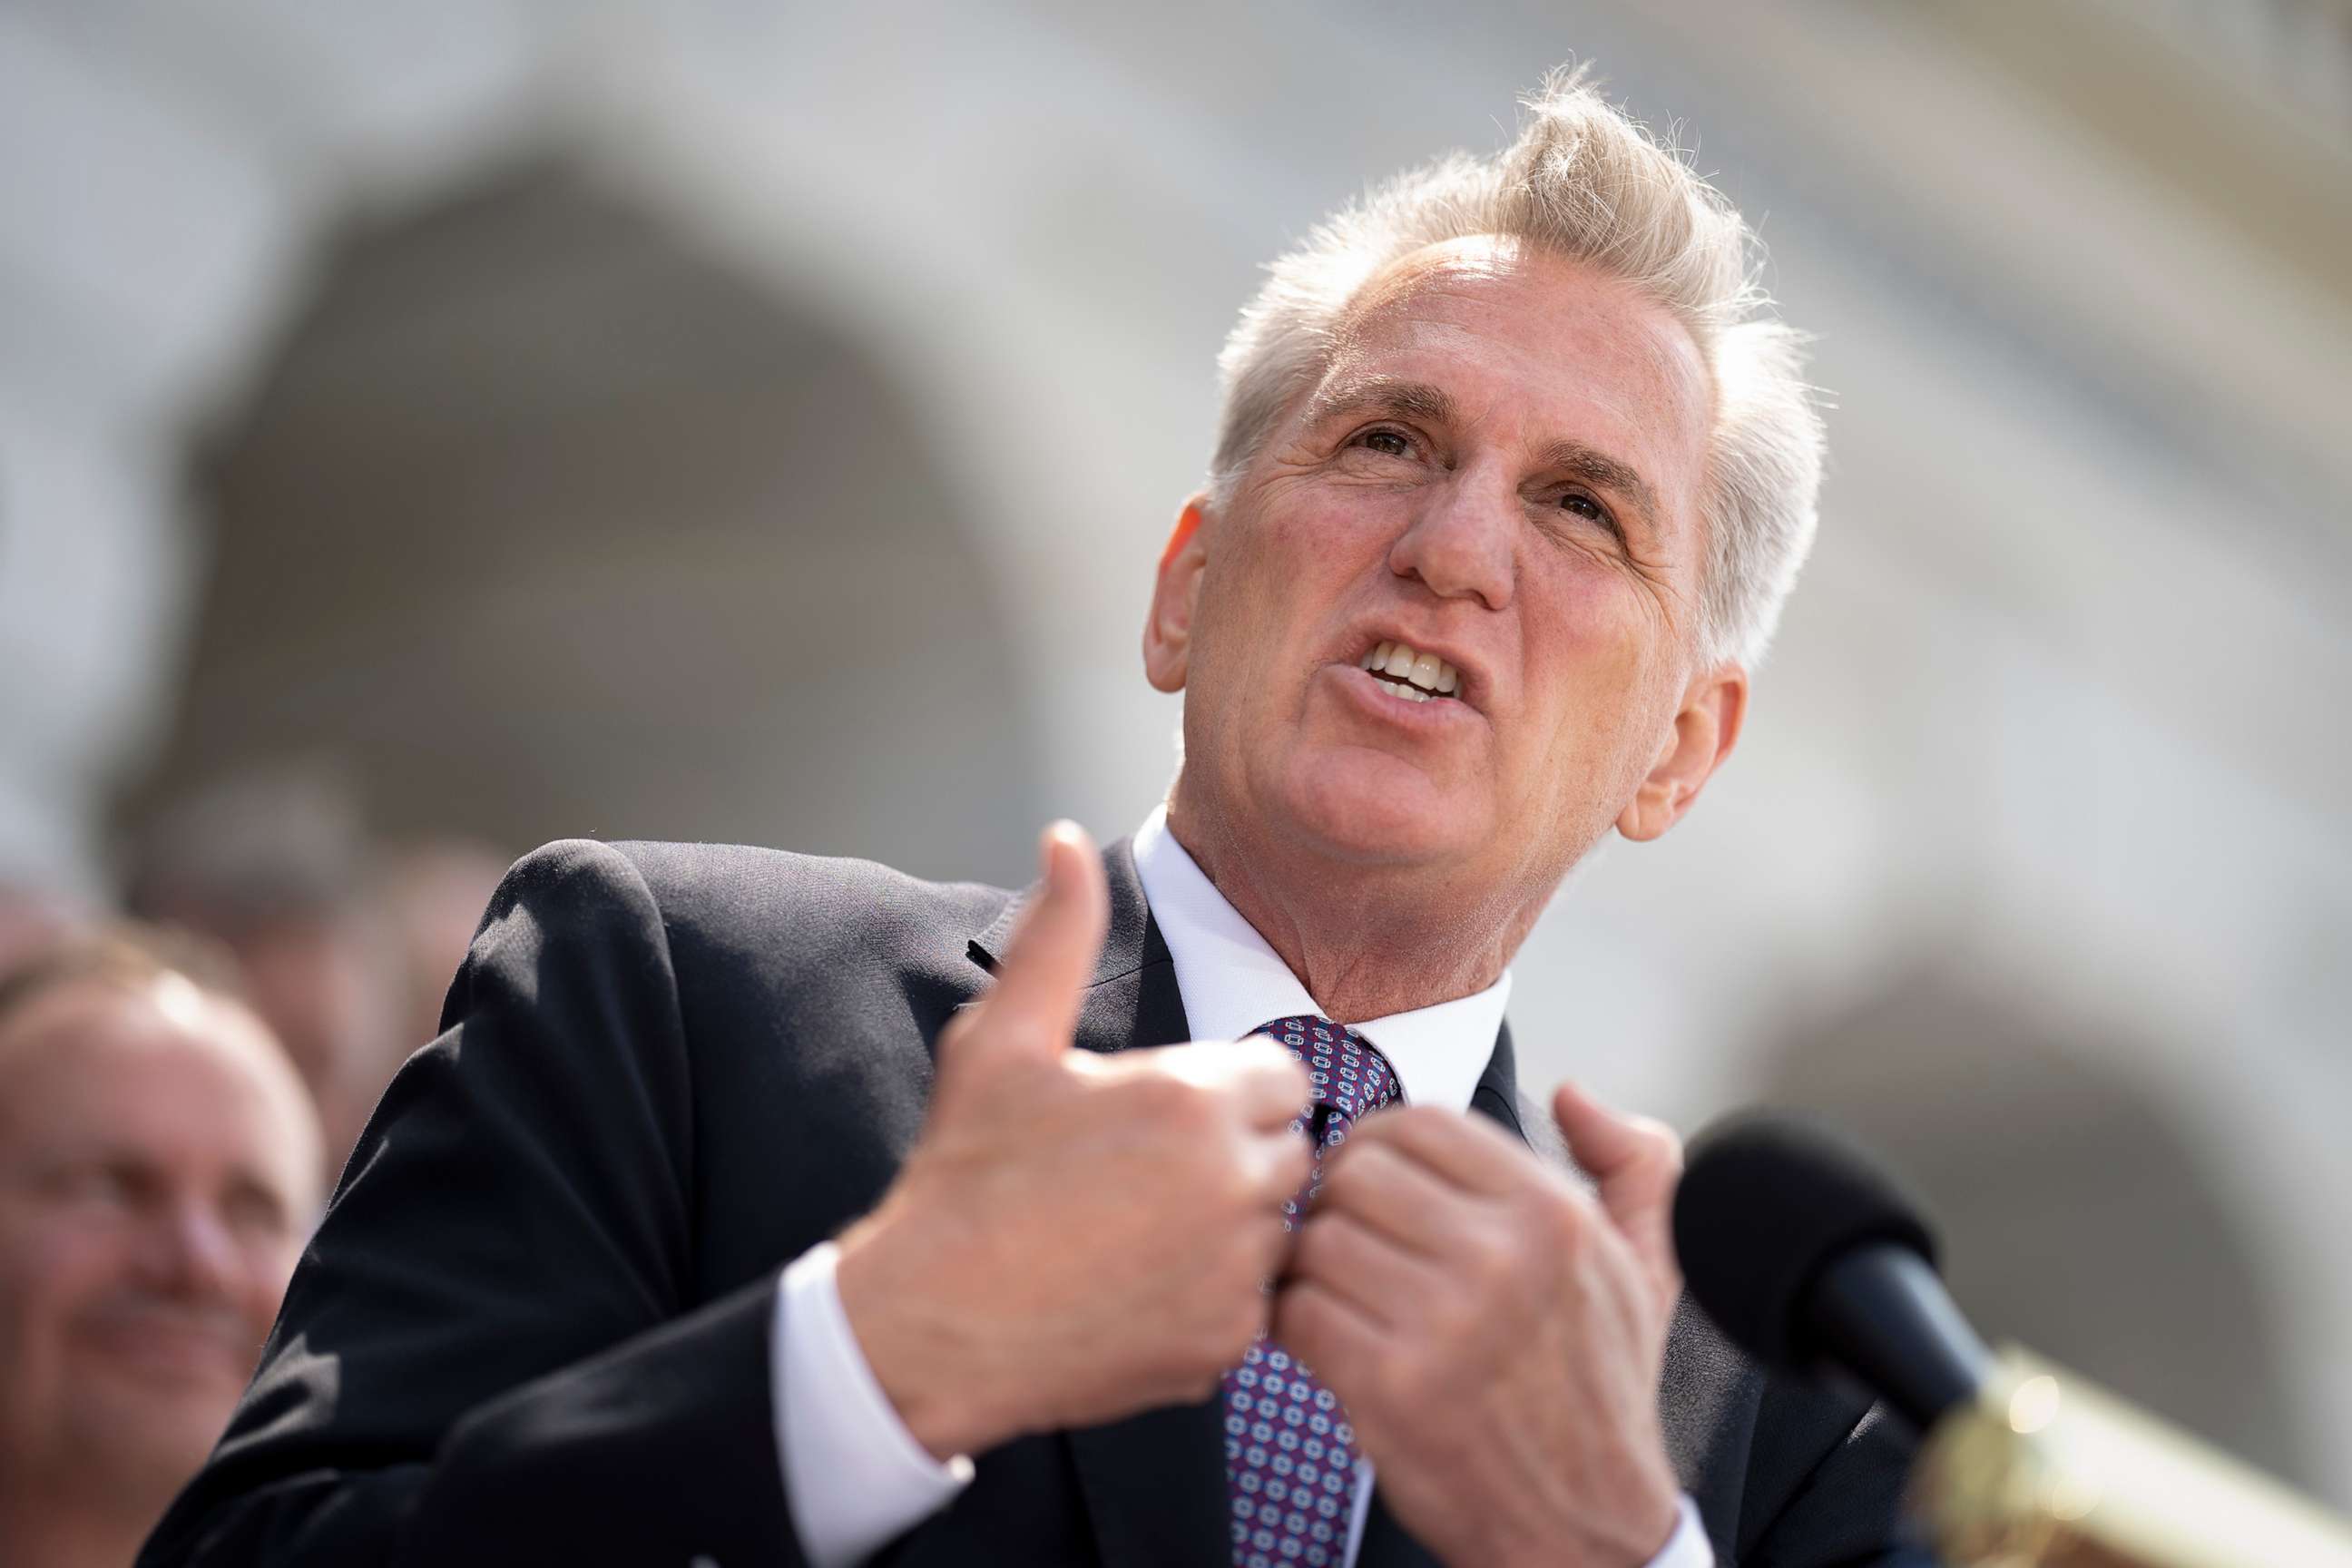 PHOTO: Speaker of the House Kevin McCarthy is joined by Republicans from the Senate and the House as he leads an event on the debt limit negotiations, at the Capitol in Washington, May 17, 2023.